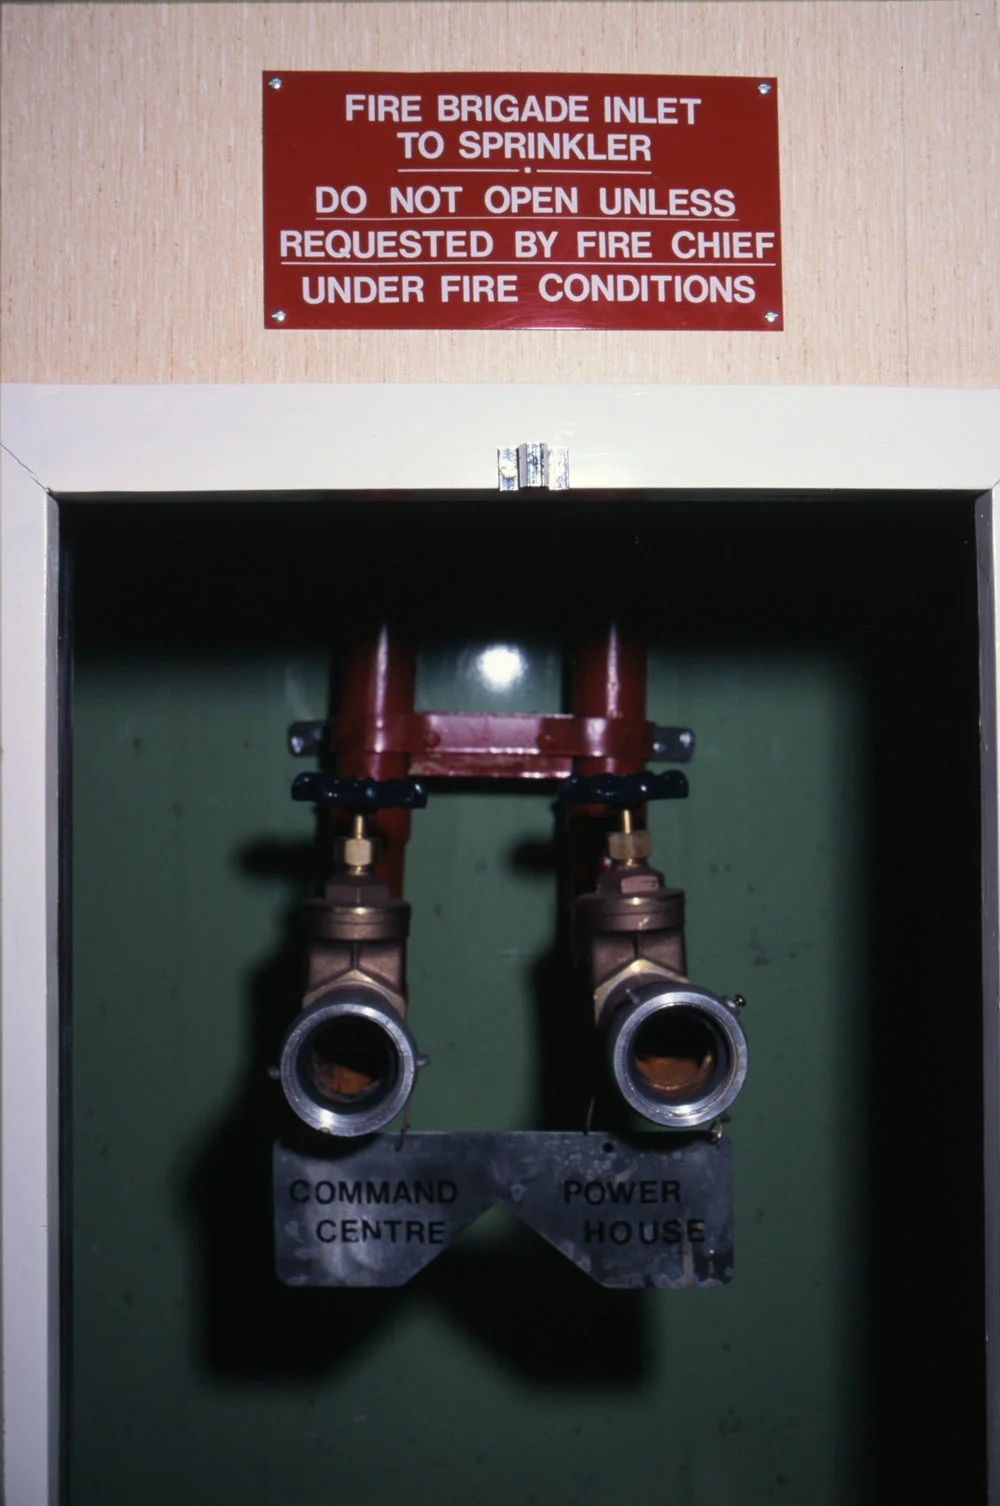 Fire equipment, sprinkler connections, command centre/powerhouse